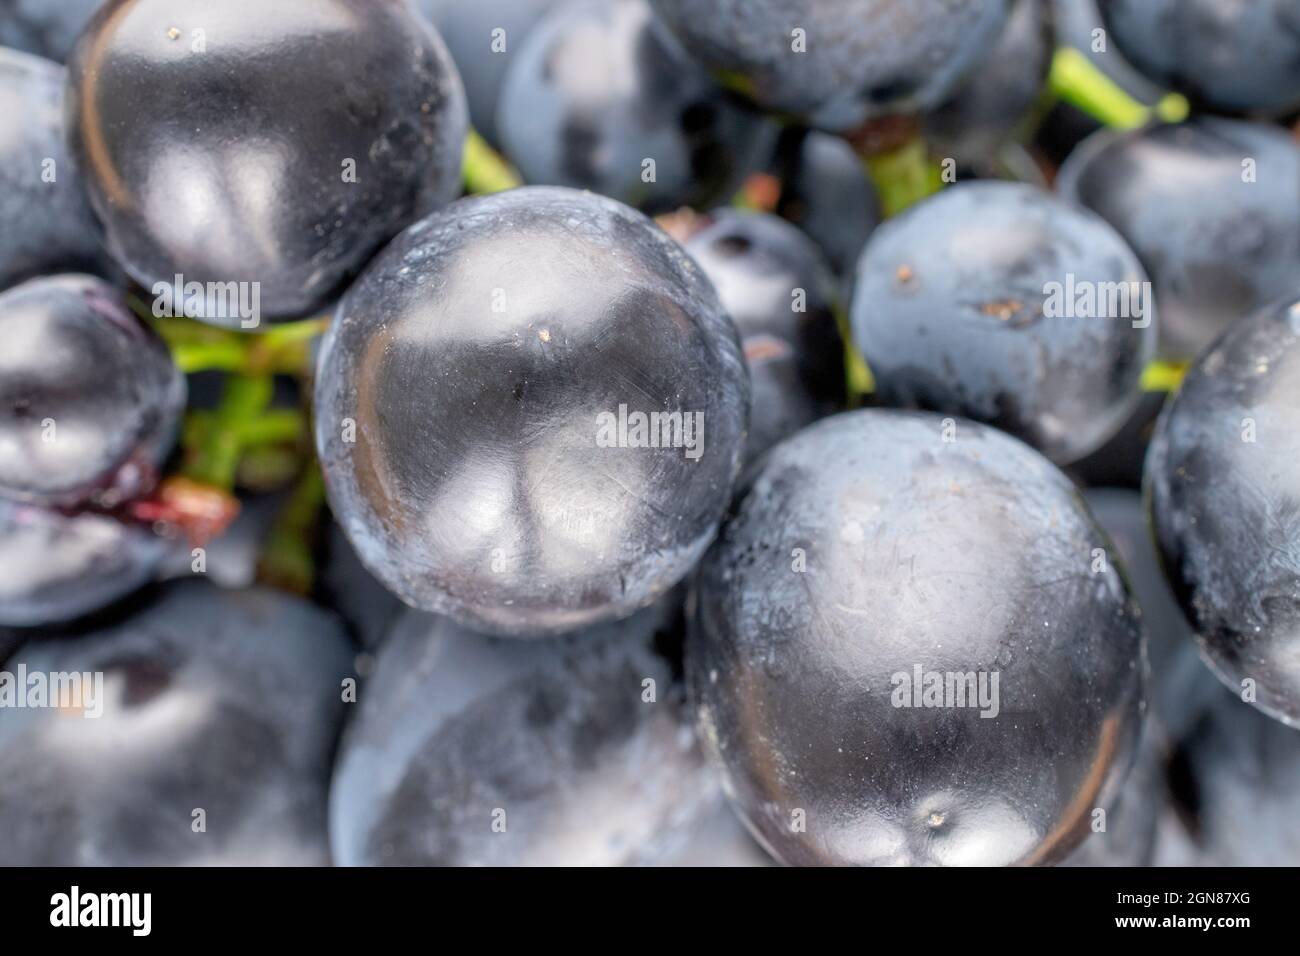 One bunch of sweet black grapes , close-up. Stock Photo